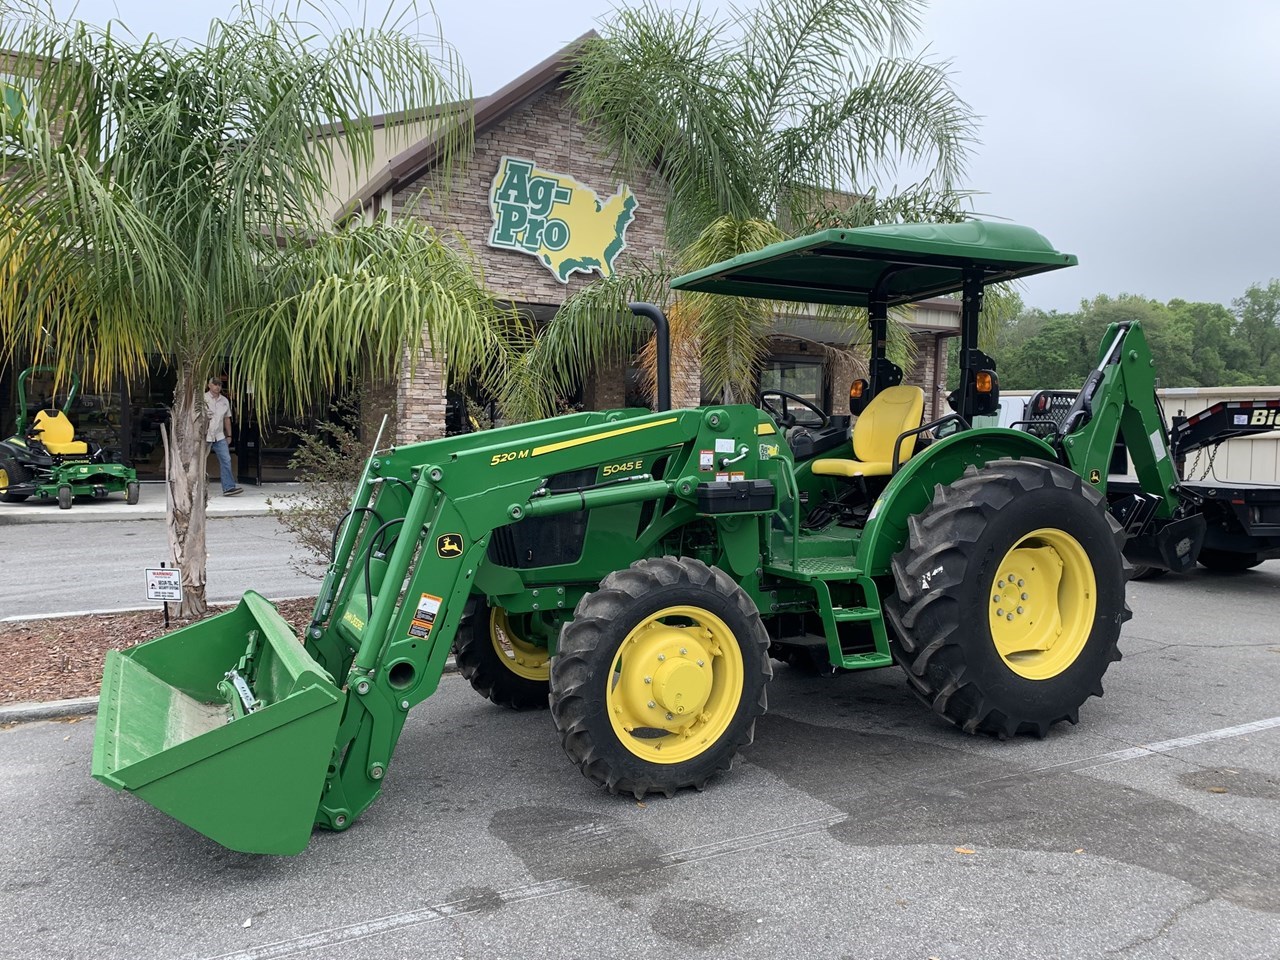 2022 John Deere 5045e Compact Utility Tractor For Sale In Jacksonville Florida 1964